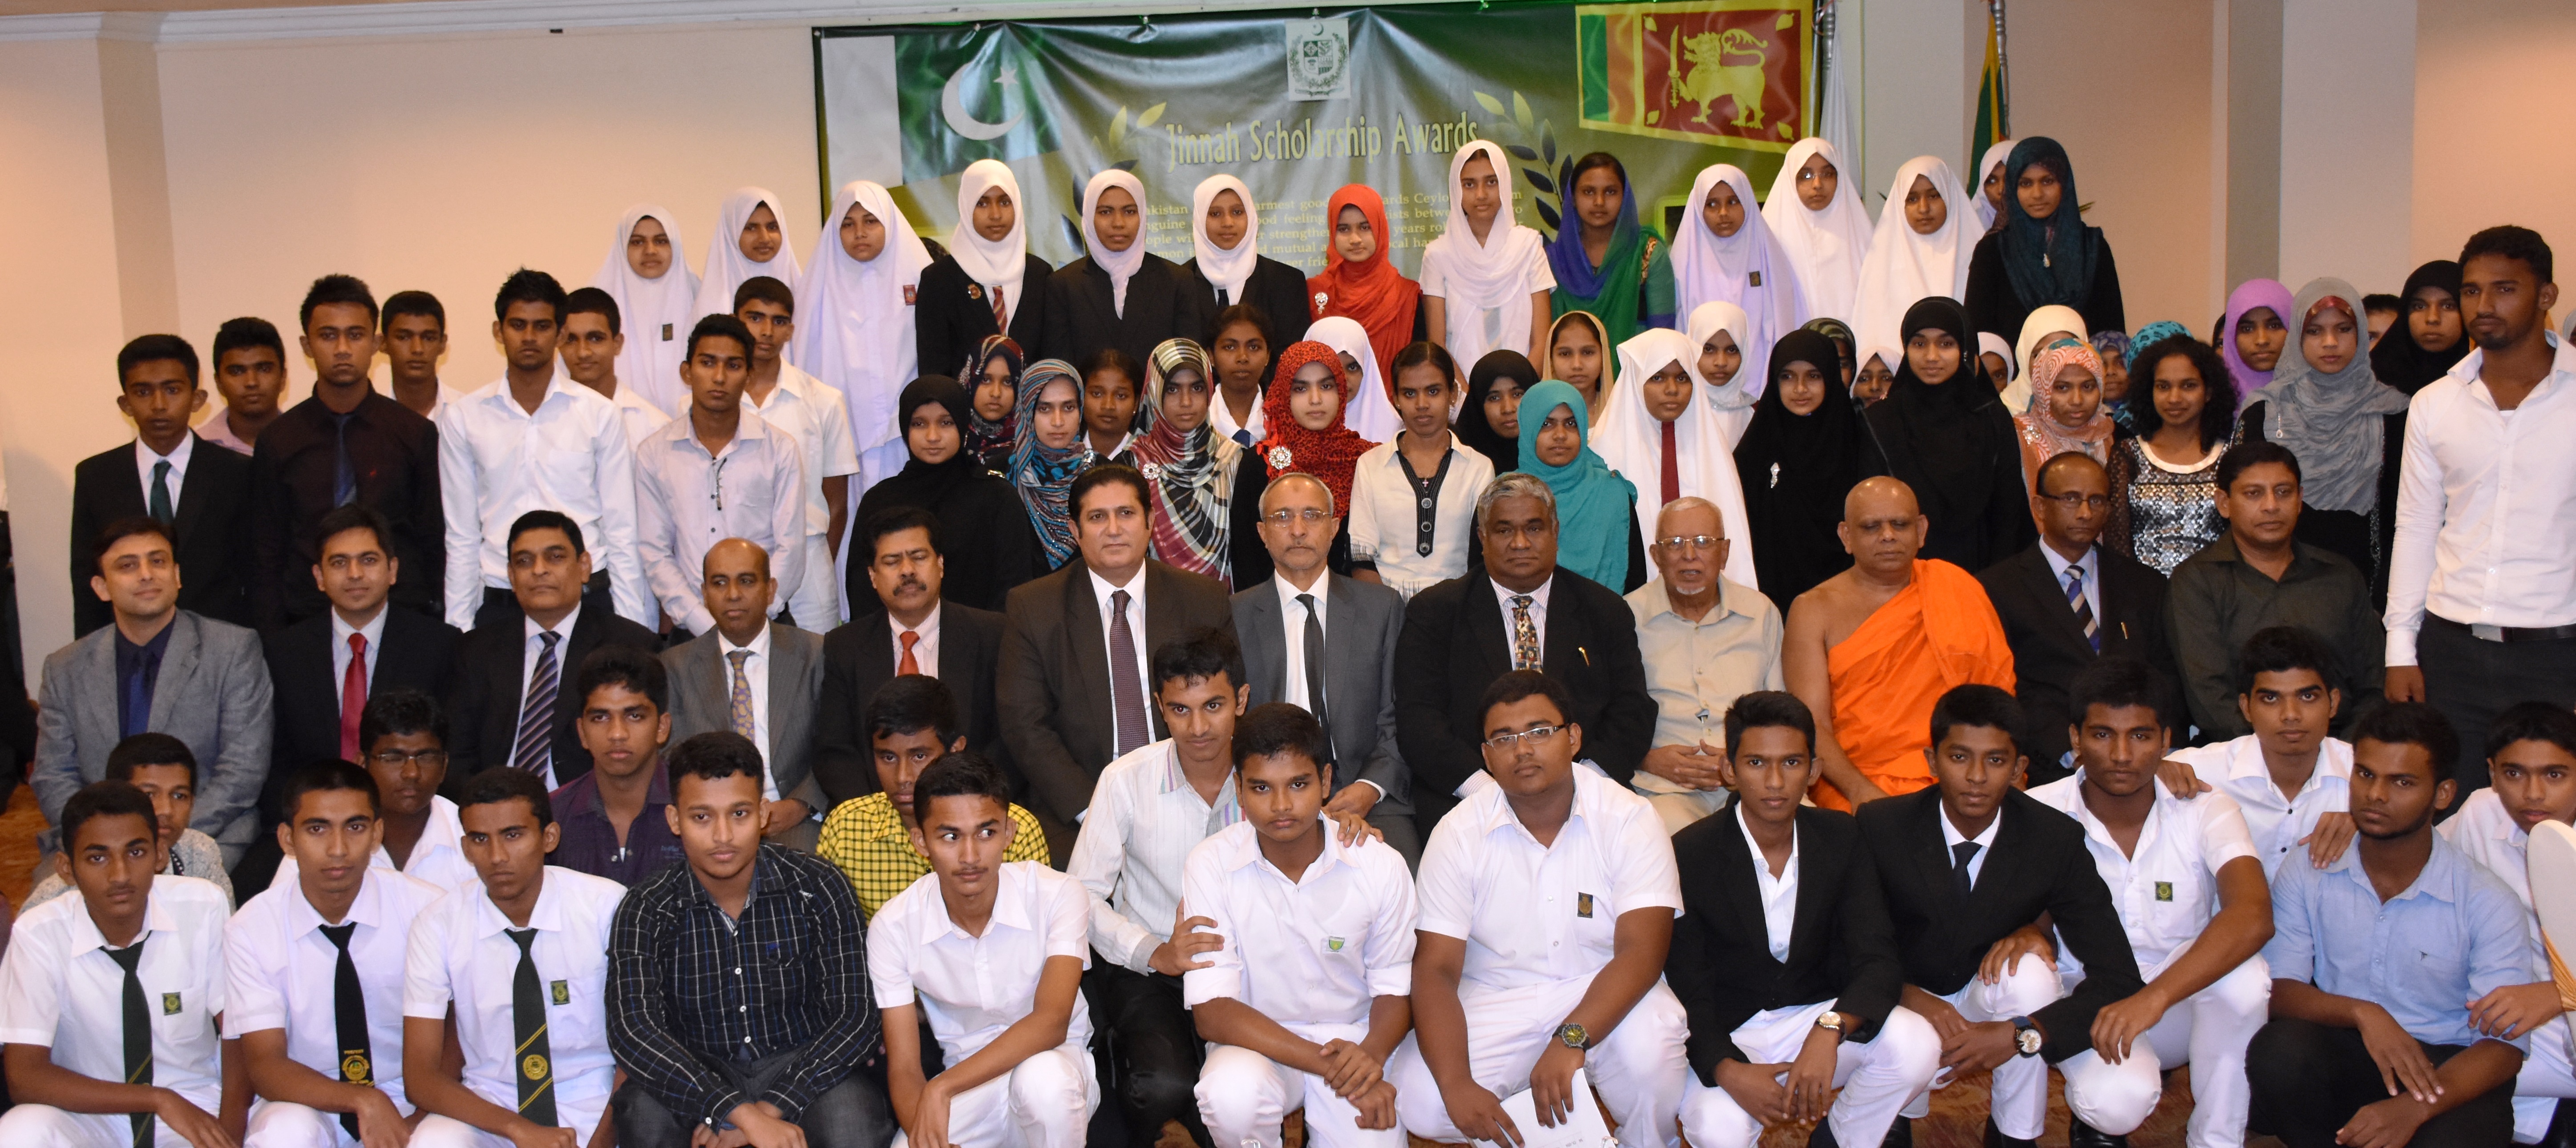 Pakistan will continue to support Sri Lankan Youth’s nation building capacities: HE Shakeel Hussain